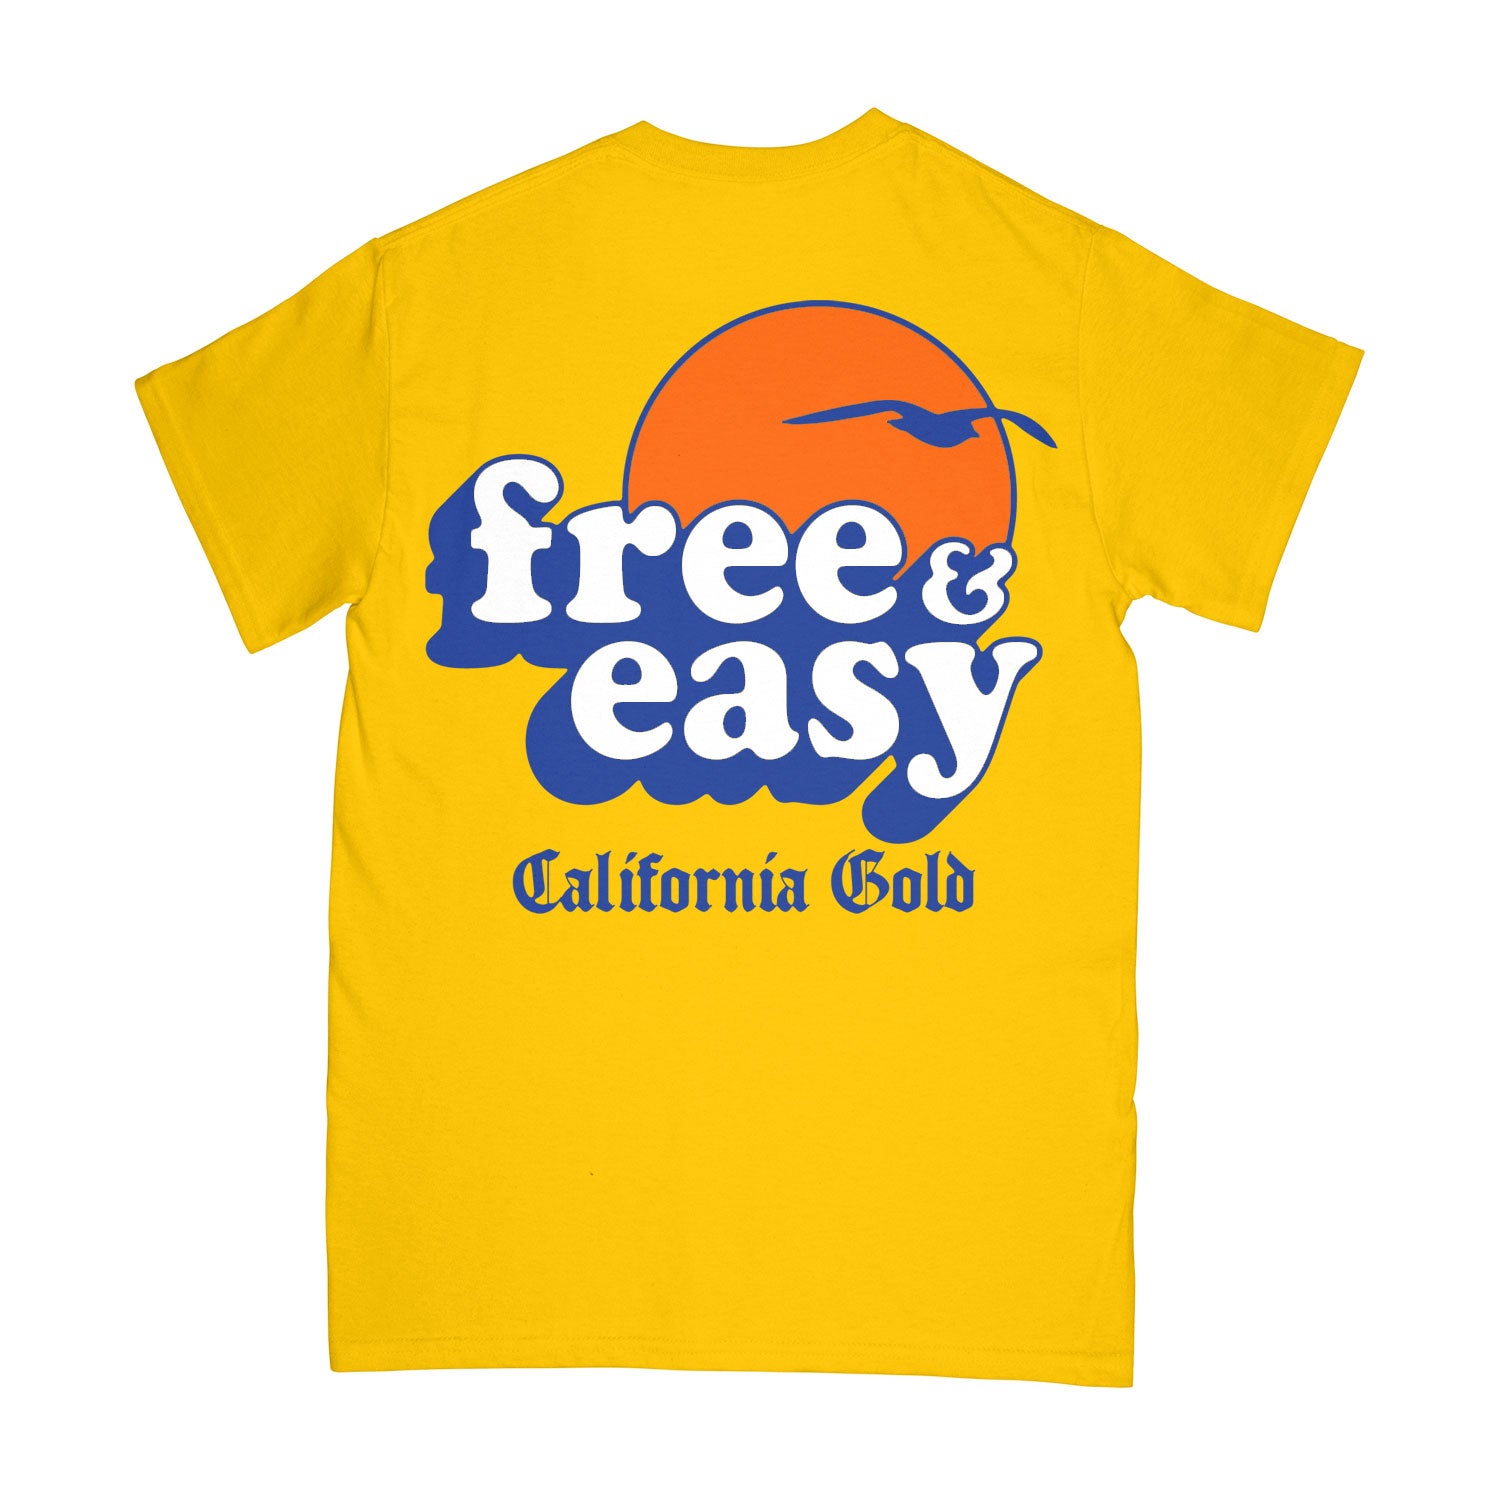 Baja Sun SS Tee in yellow with white navy and orange Free & Easy California Gold sun bird design on a white background, back - Free & Easy